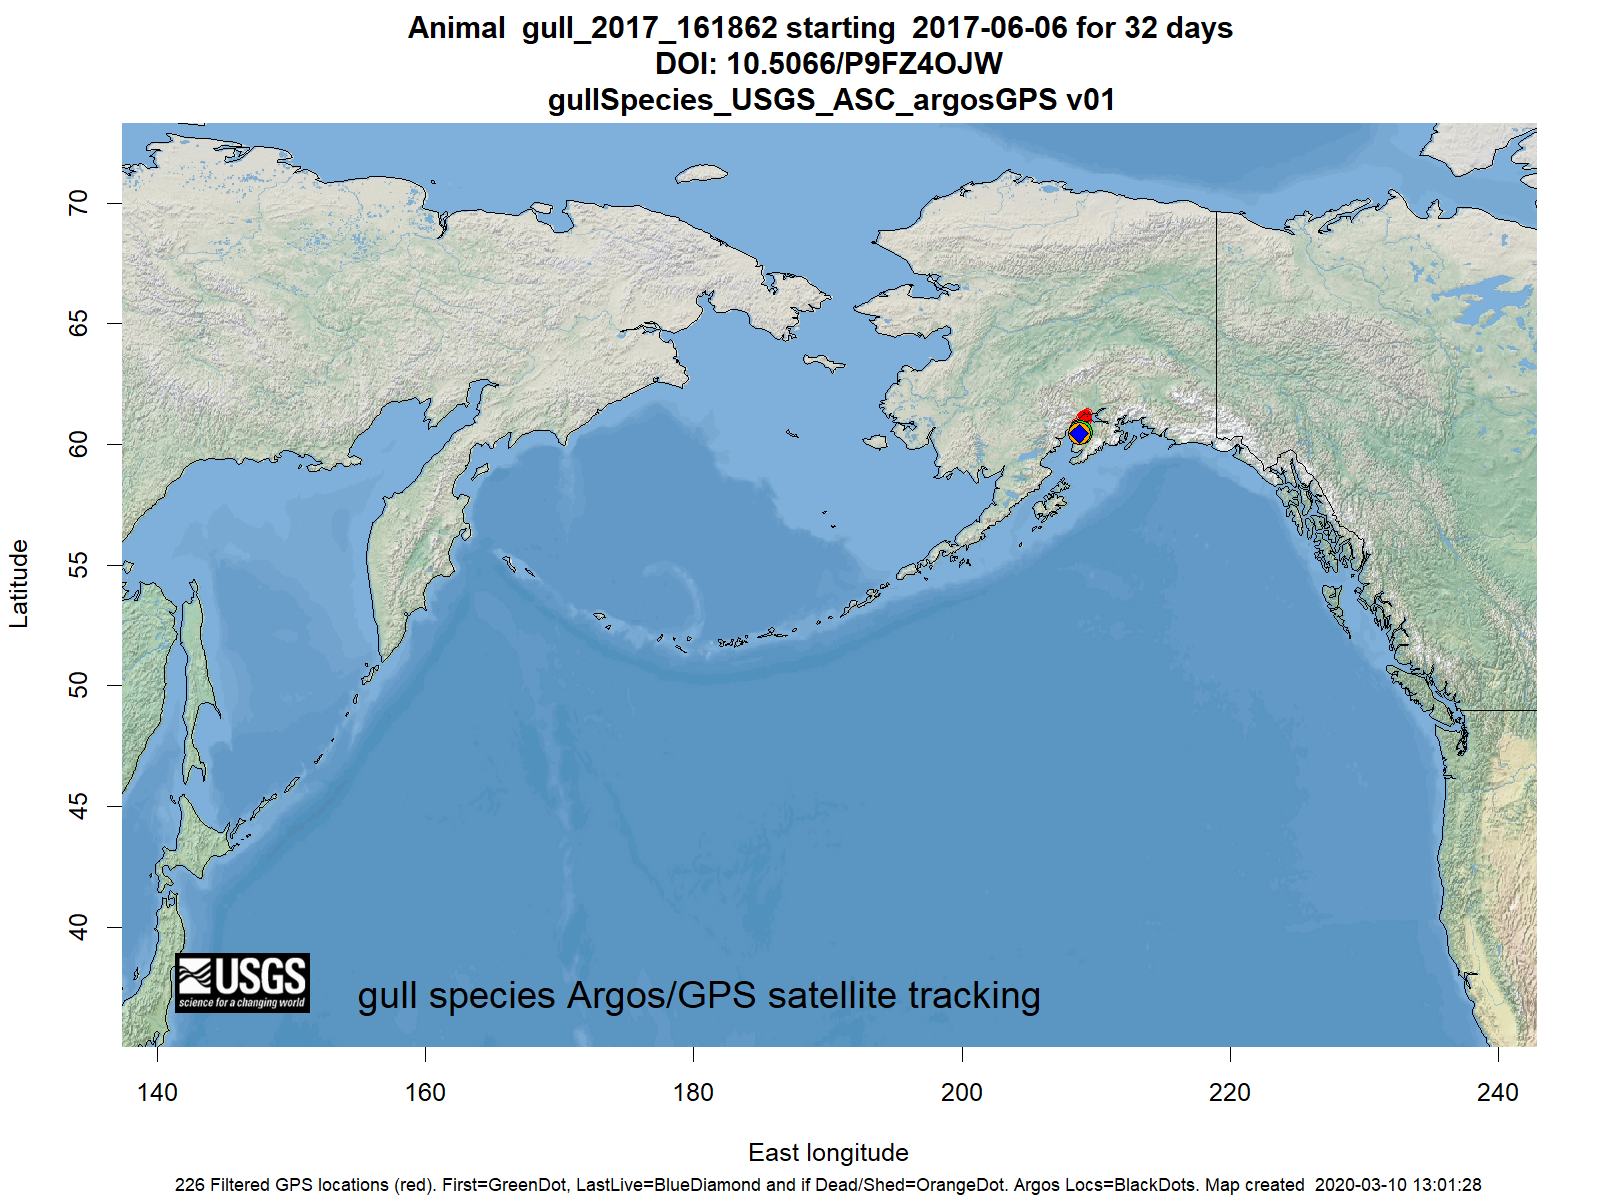 Tracking map for species gull_2017_161862